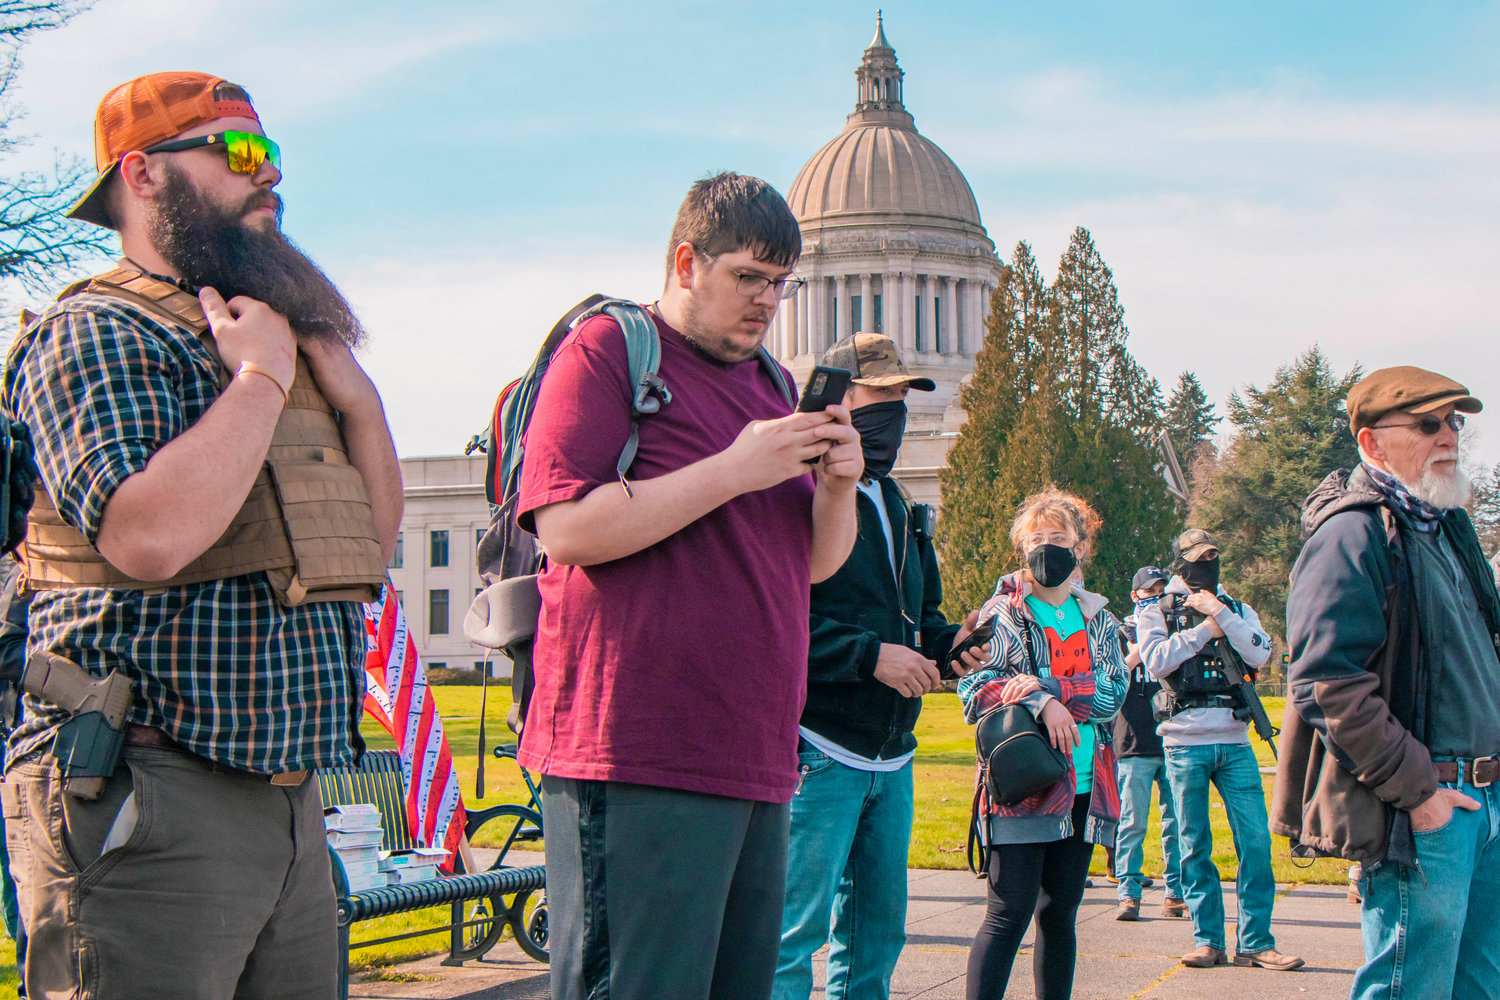 Protesters gather during a demonstration in support of open carry on Saturday near the Washington State Capitol Building in Olympia.